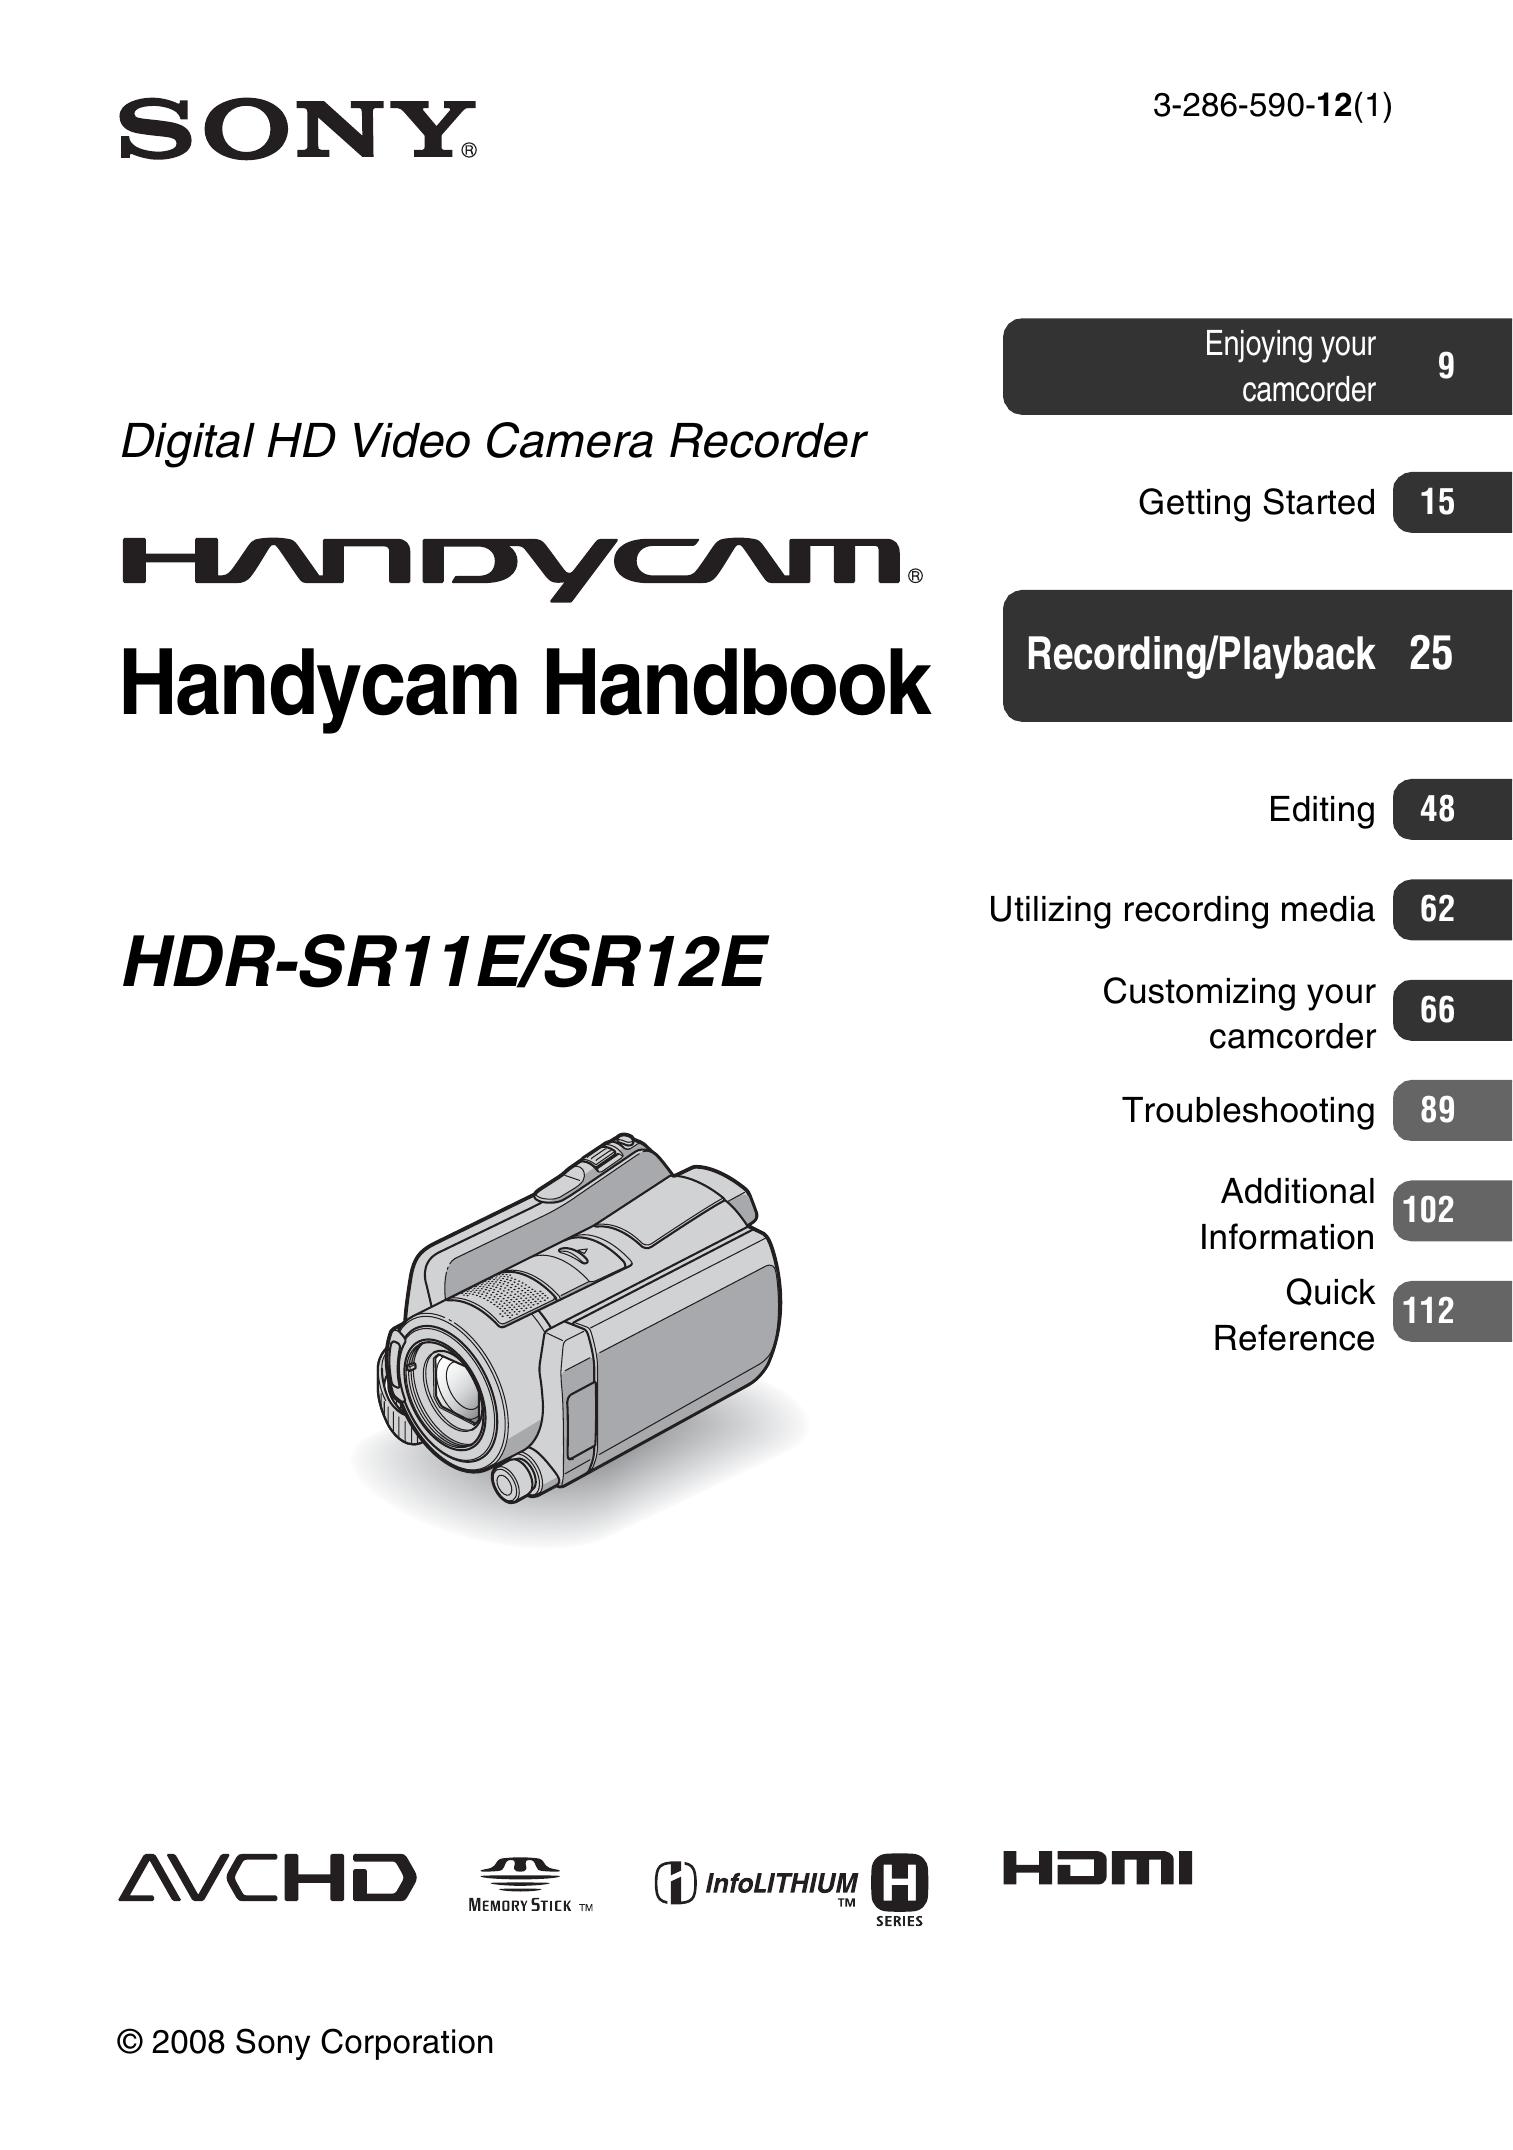 Sony 3-286-590-12(1) Camcorder User Manual